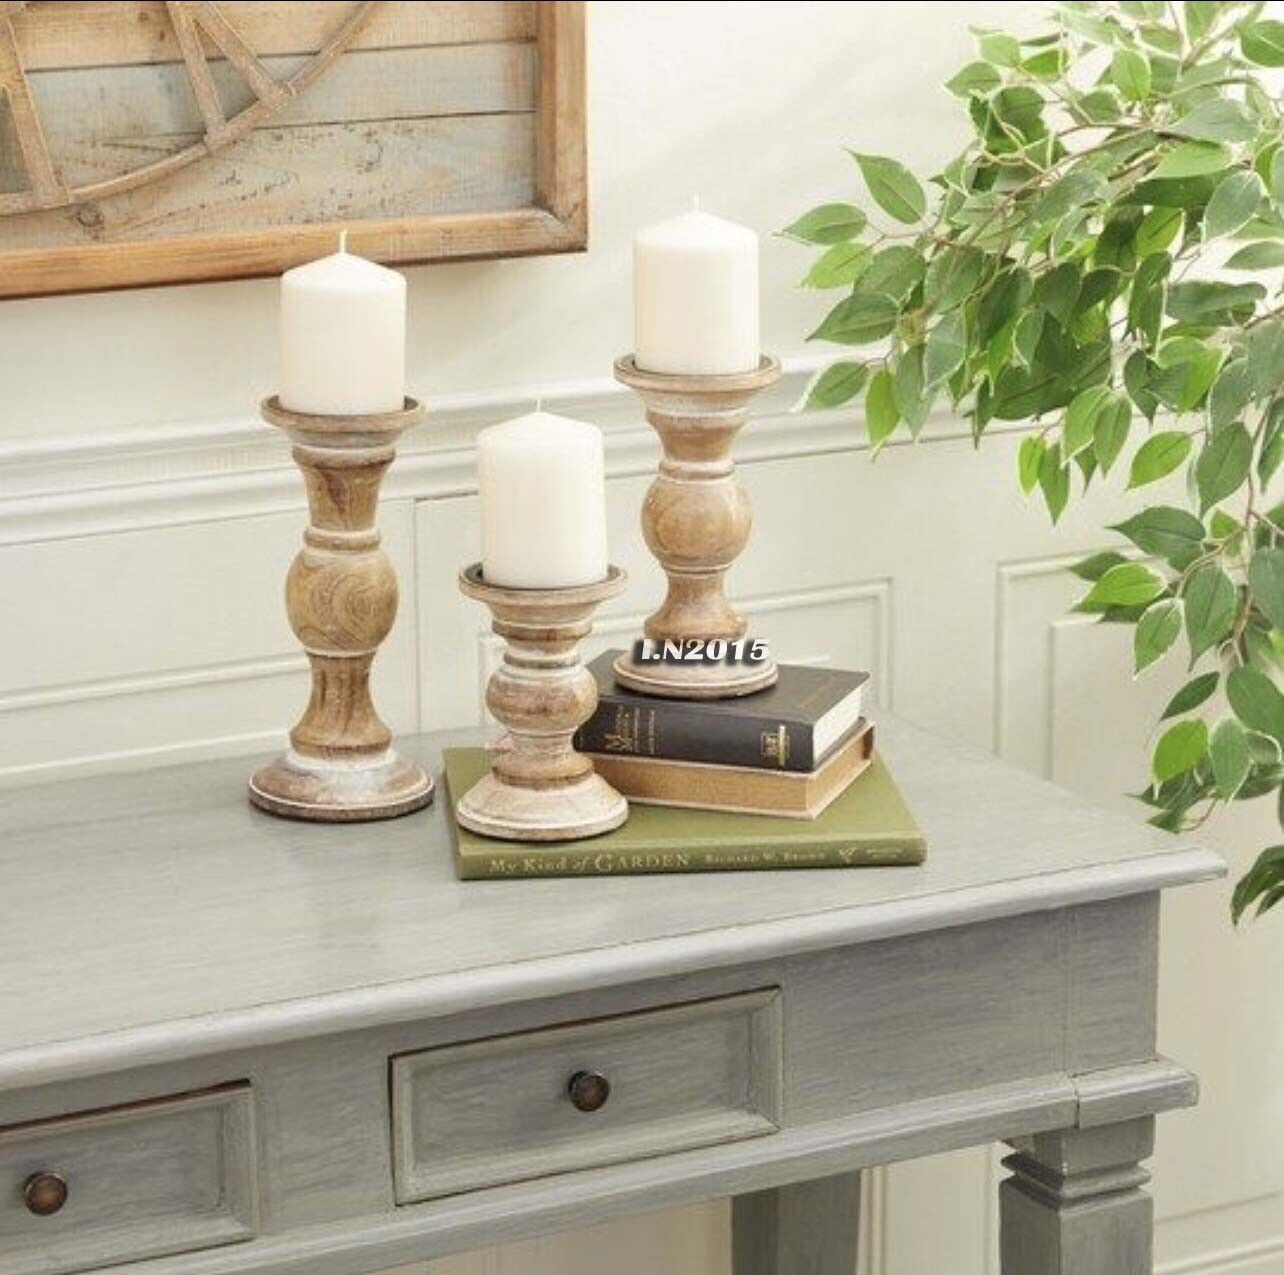 Barnyard Designs Pillar Candle Holder Farmhouse Candle Holders for Table